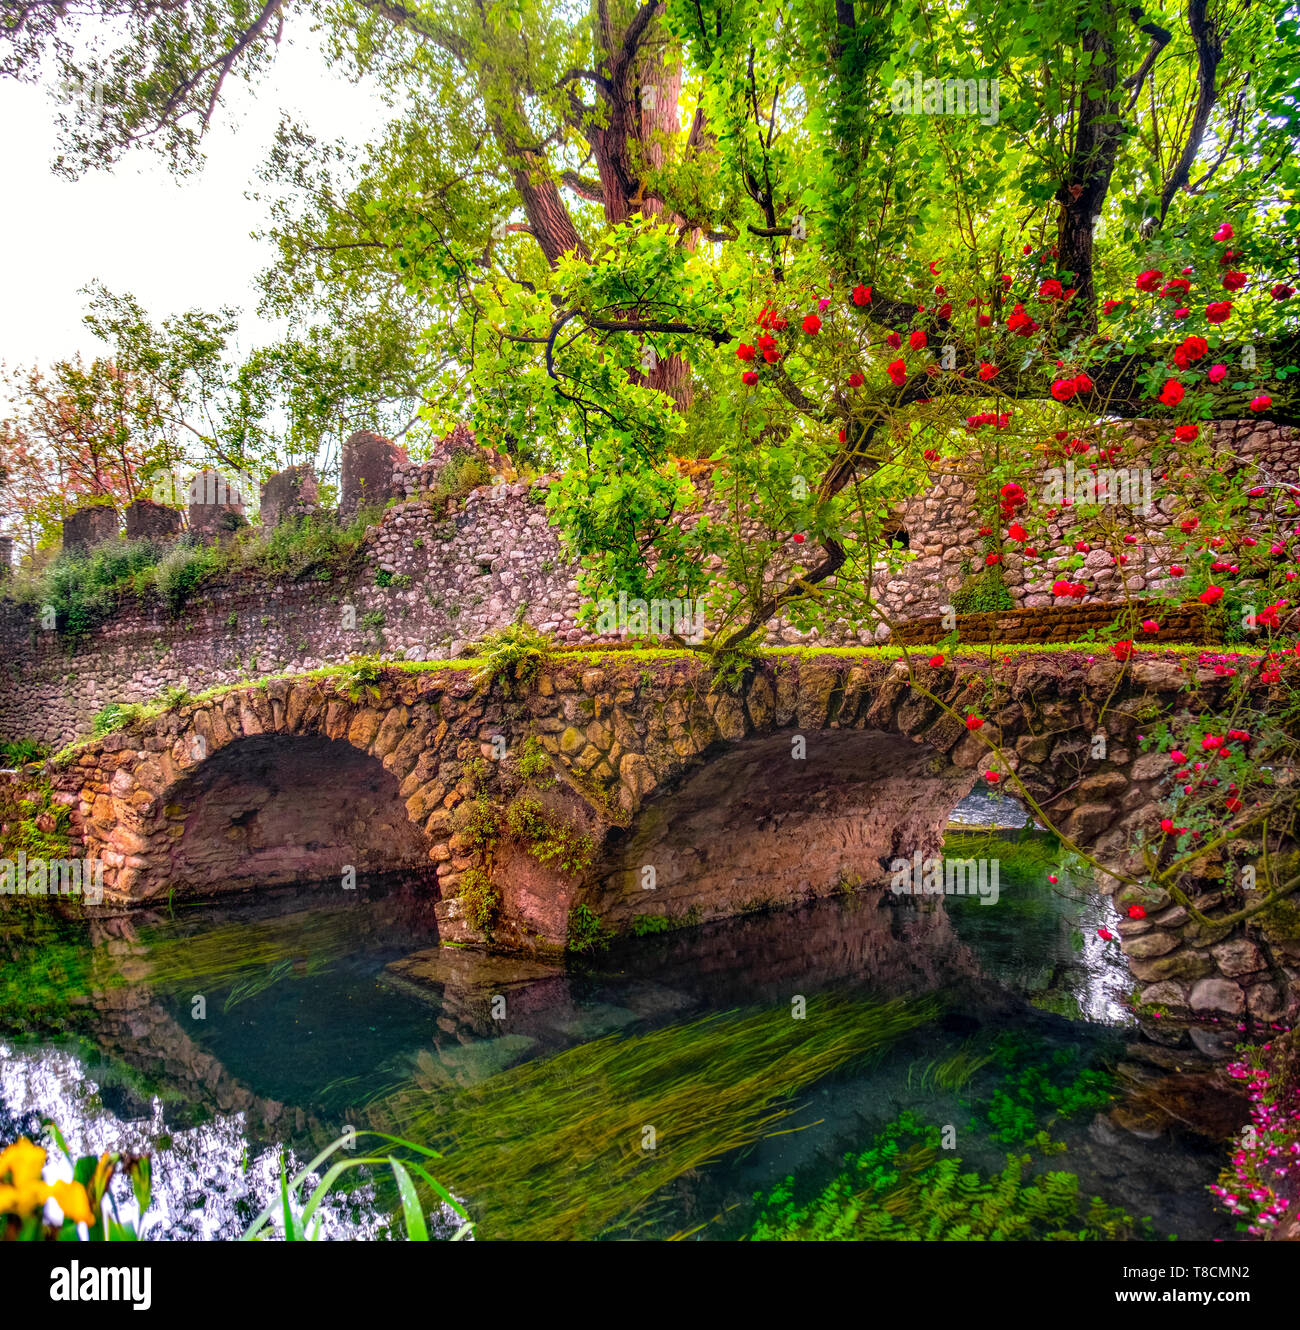 medieval stone bridge in eden colourful garden vibrant with roses and river  Stock Photo